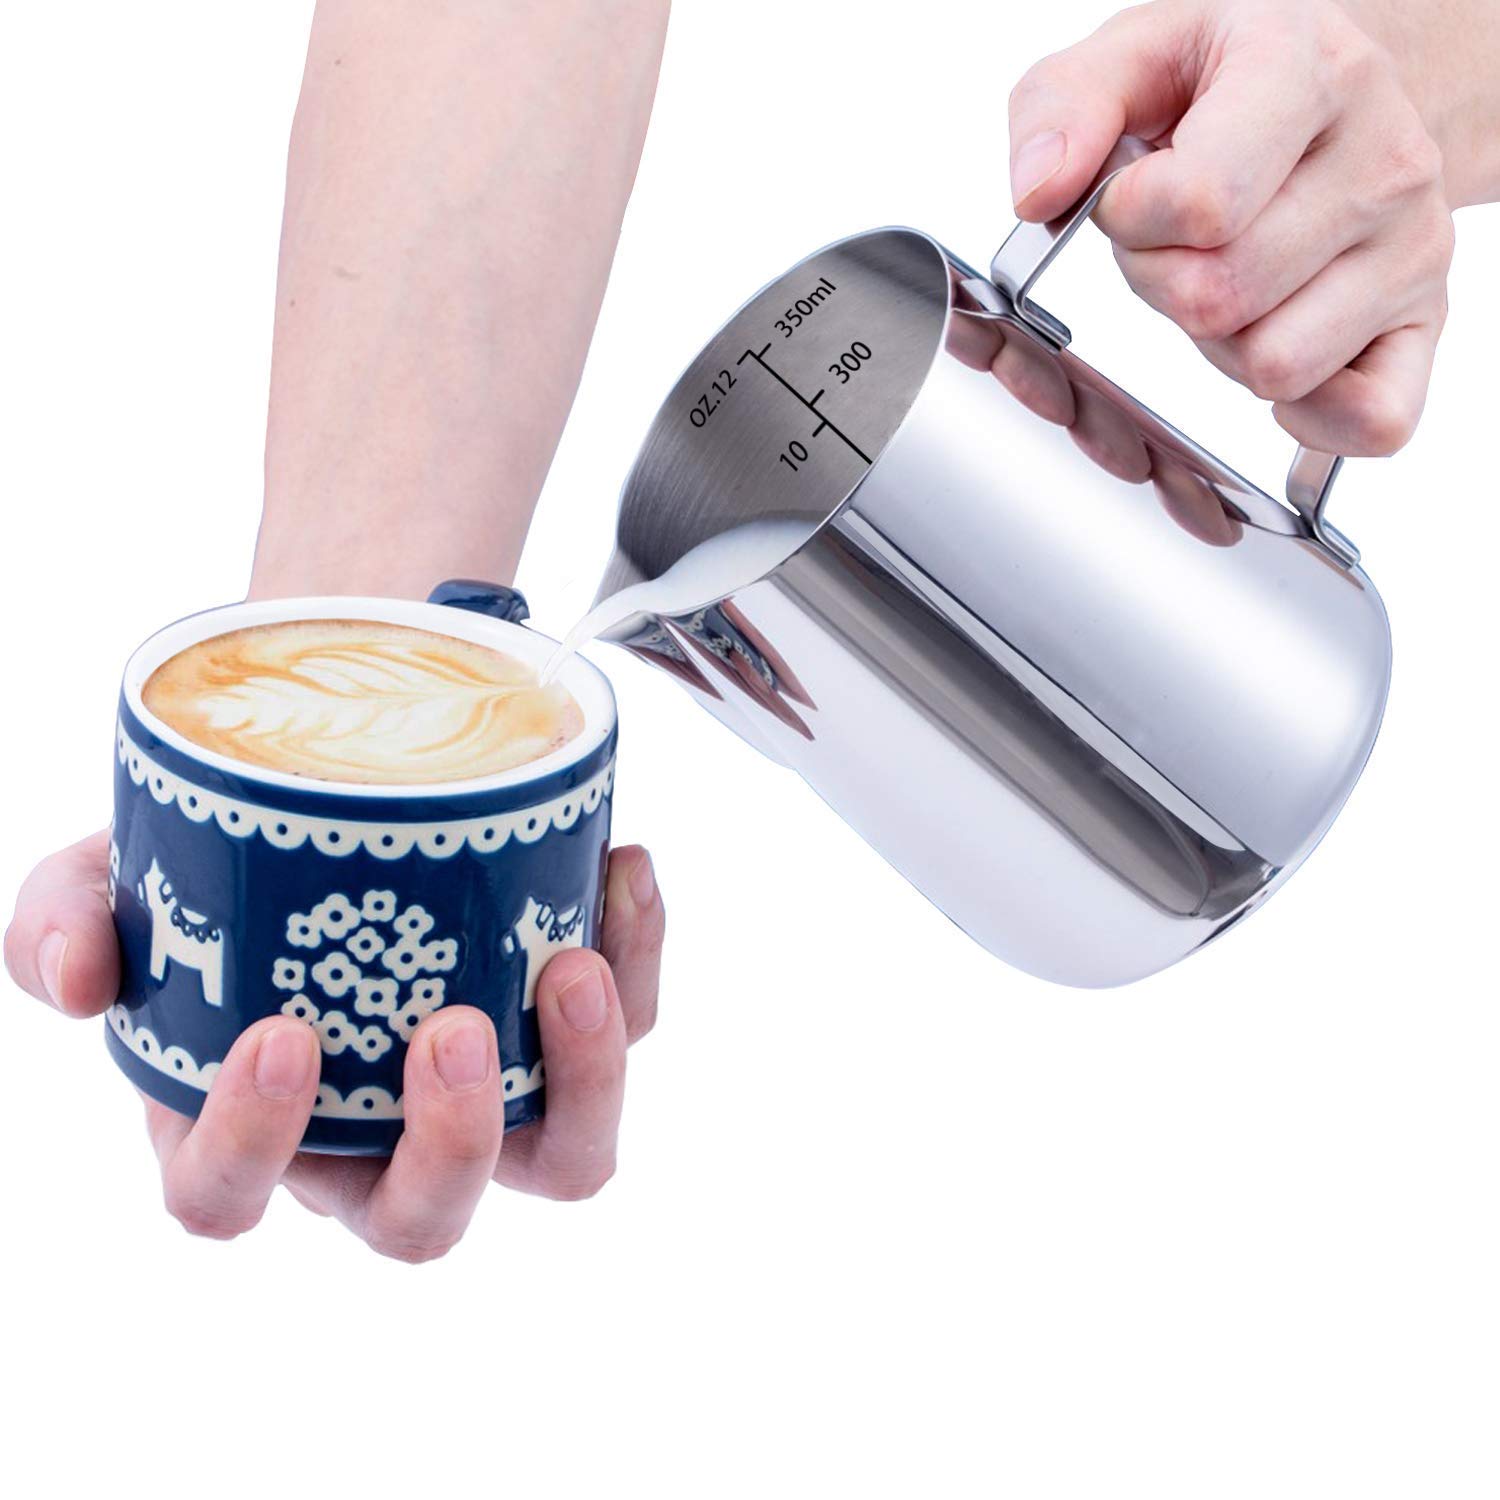 Milk Frothing Pitcher, Stainless Steel Art Creamer Cup Milk Frother Steamer Cup Stainless Steel Coffee Milk Frothing Cup,Coffee Steaming Pitcher 12oz/350ml